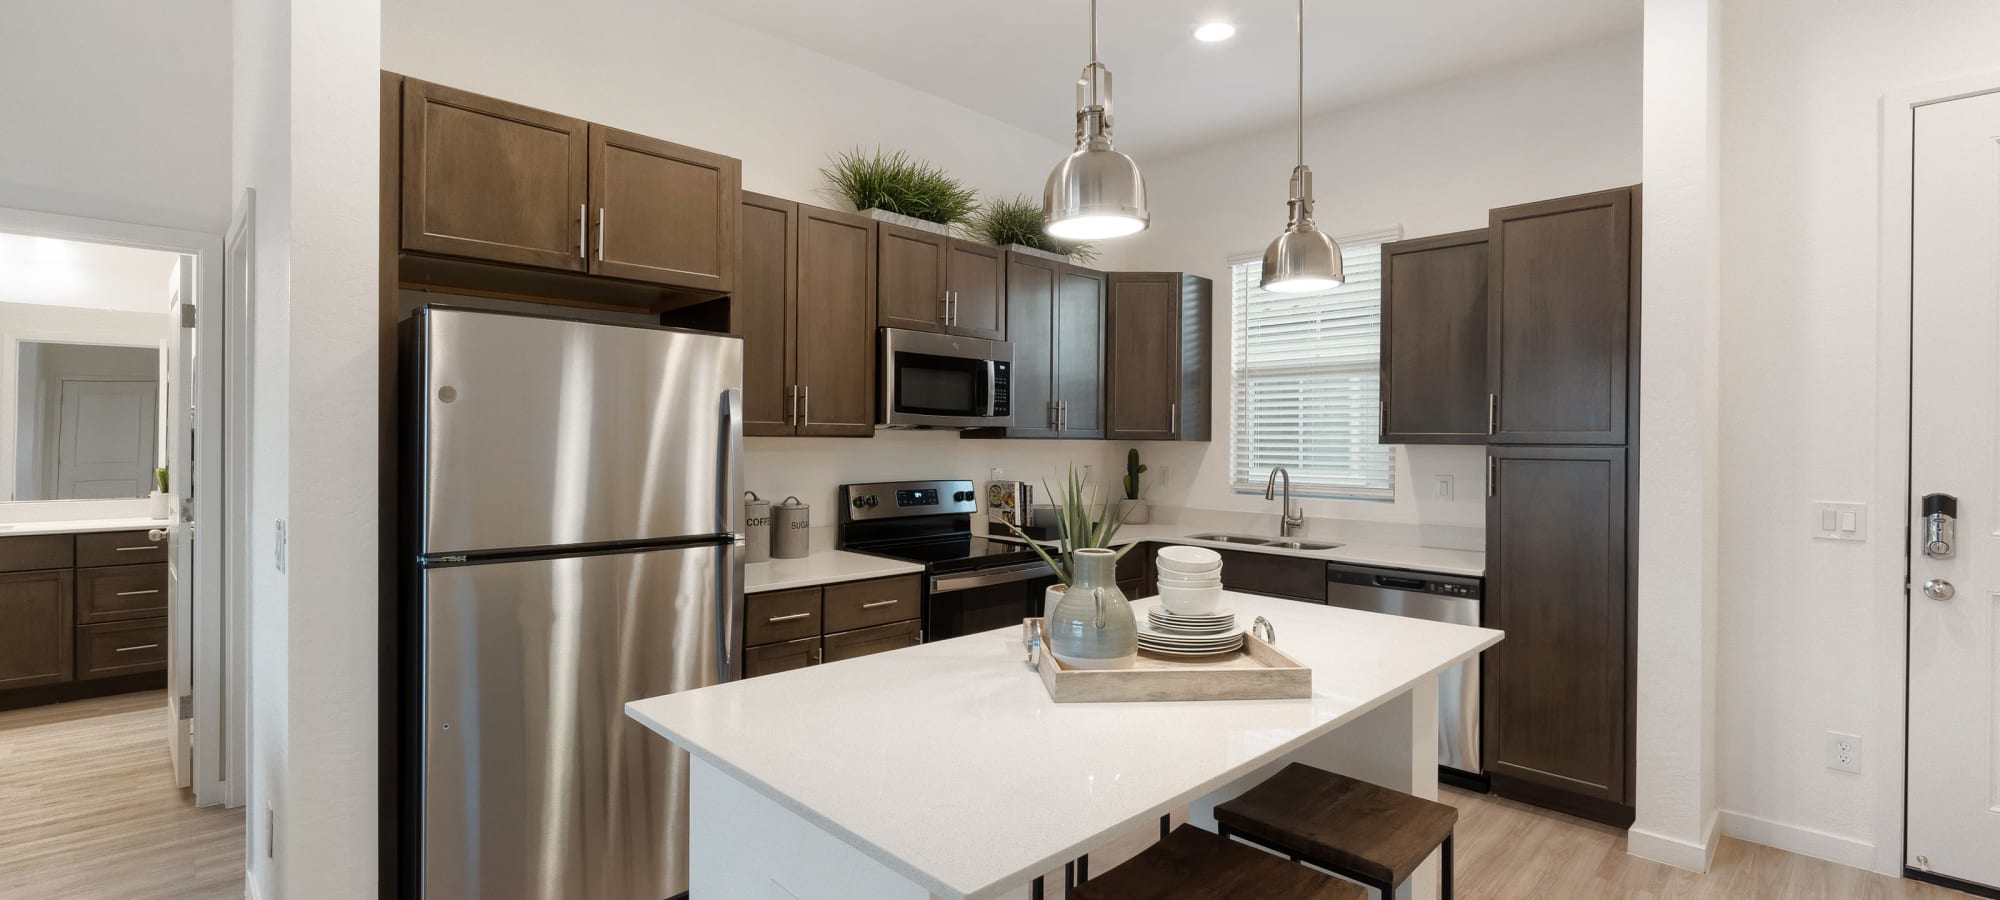 Luxury kitchen with stainless steel appliances at Estia Windrose in Litchfield Park, Arizona